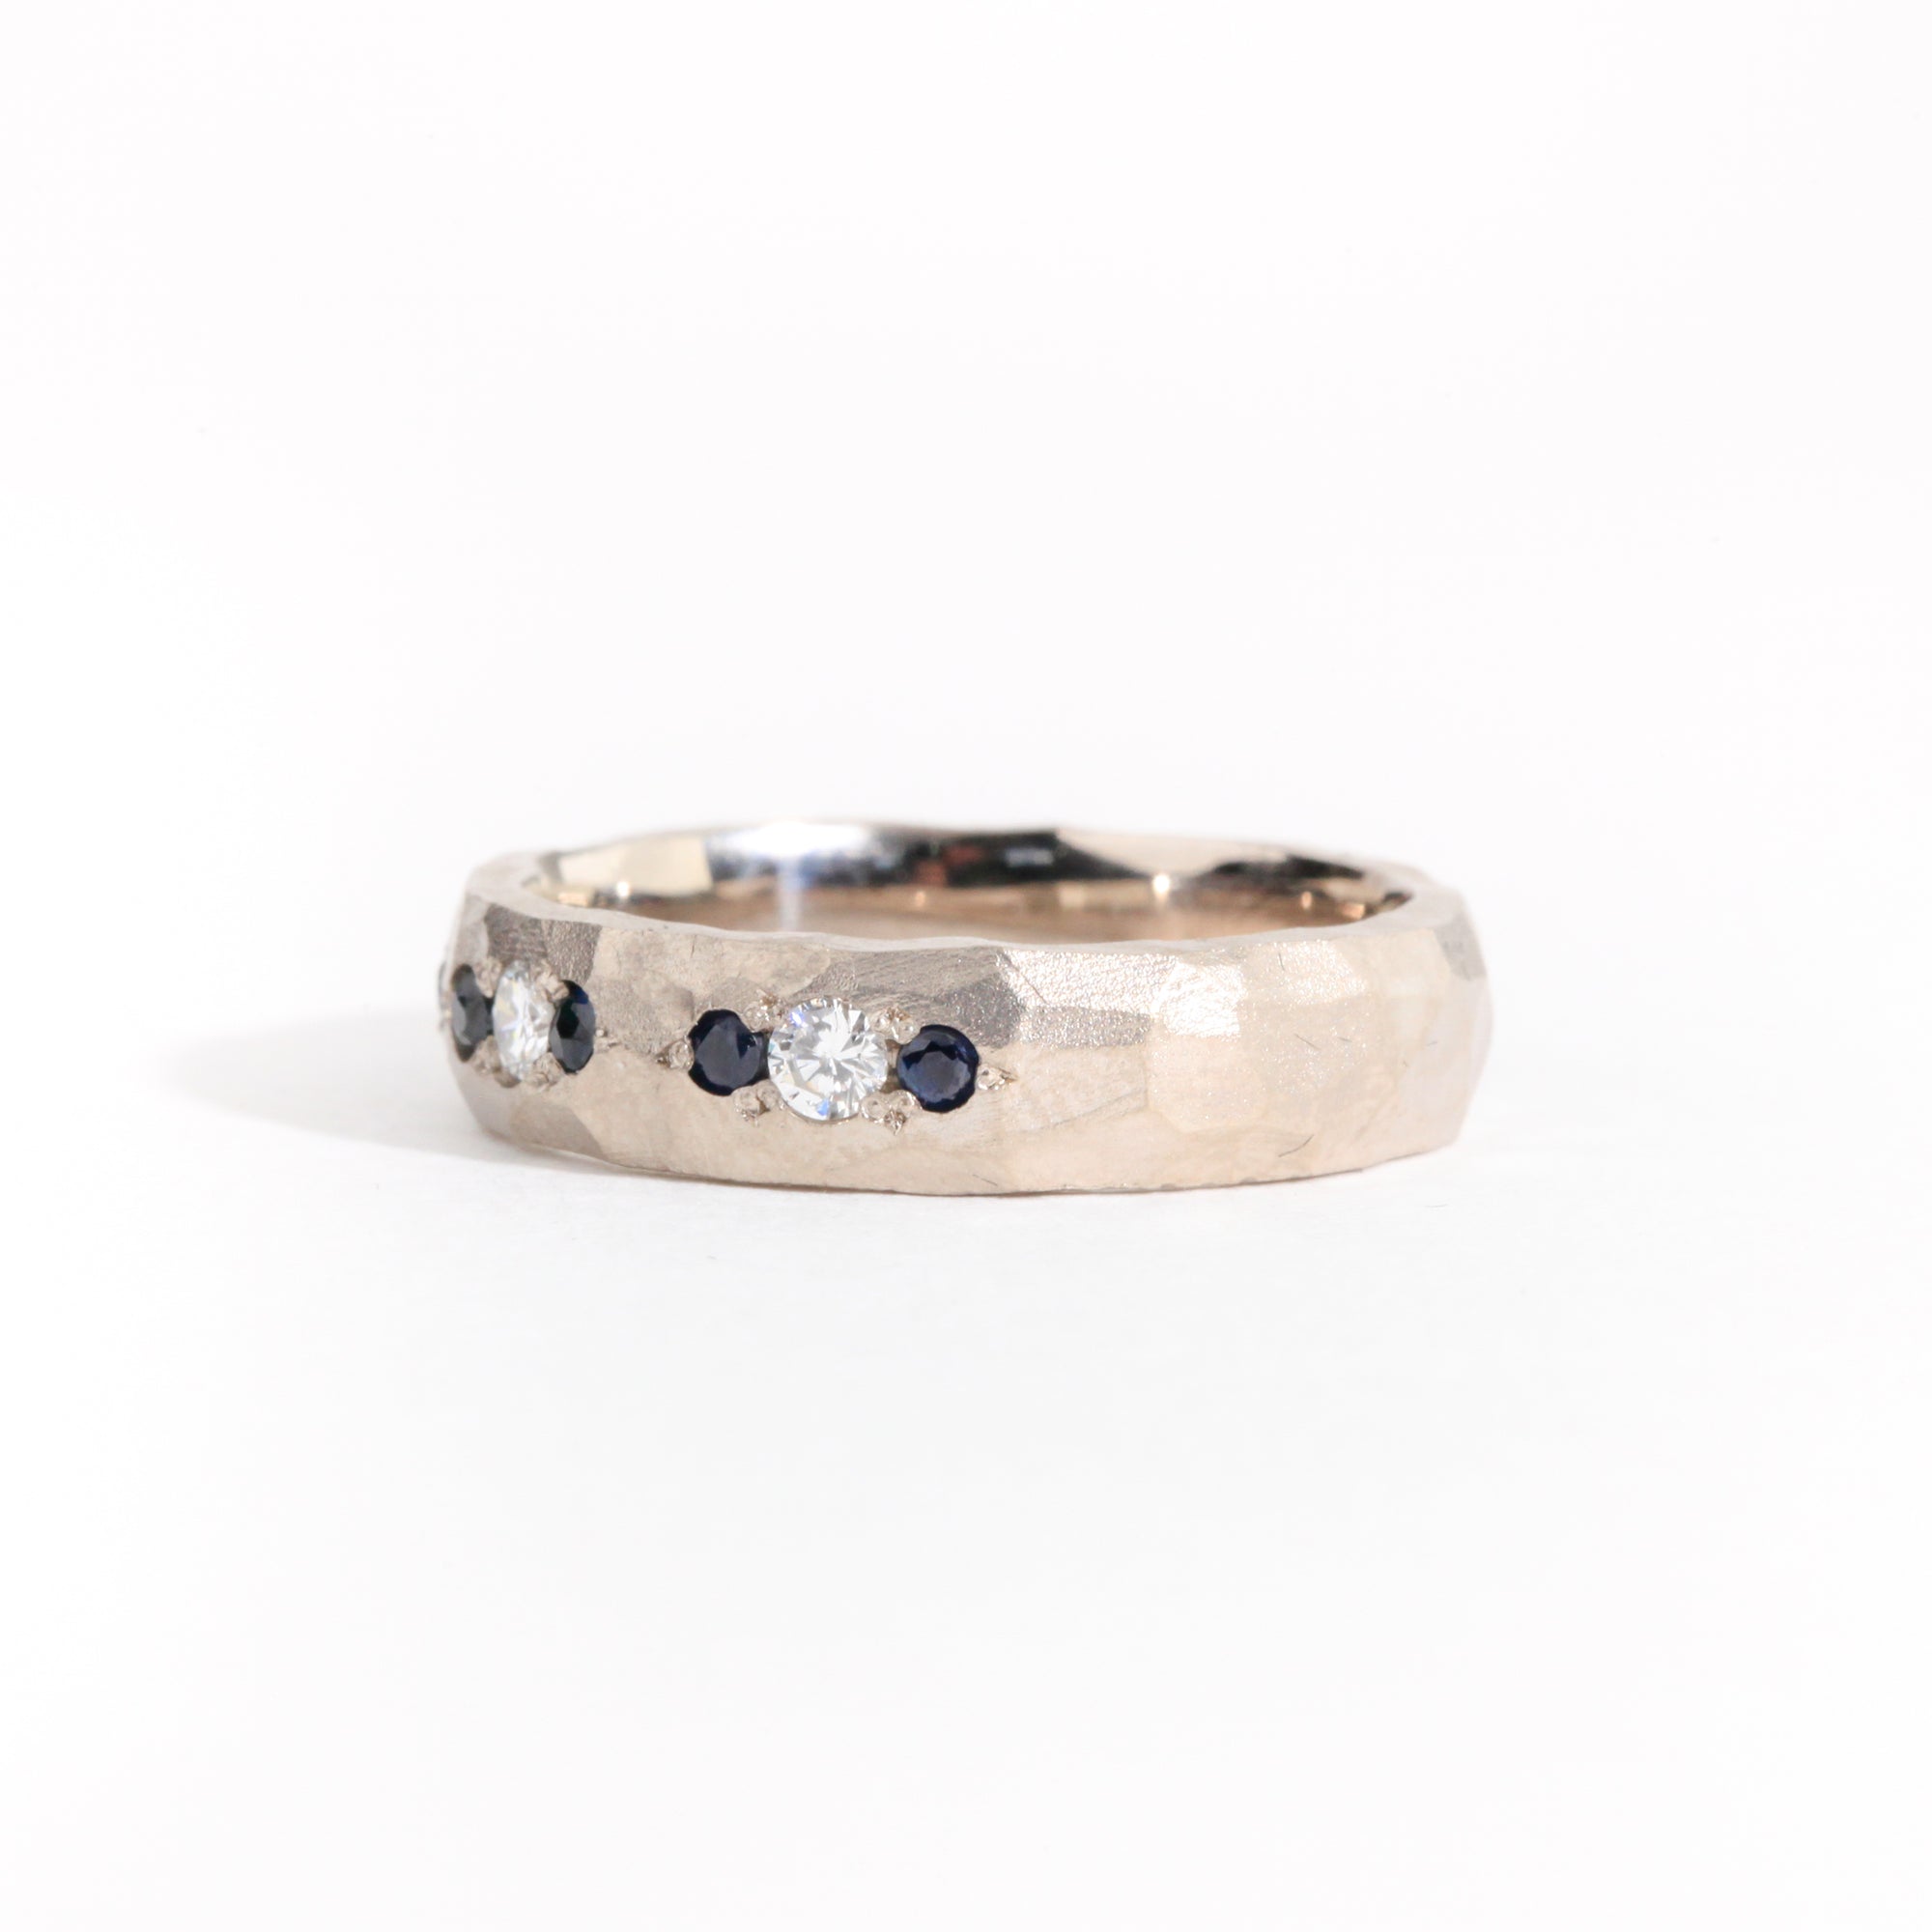 Hammered 18 carat white gold men's wedding band, set with ethically sourced Australian sapphires and conflict free diamonds.